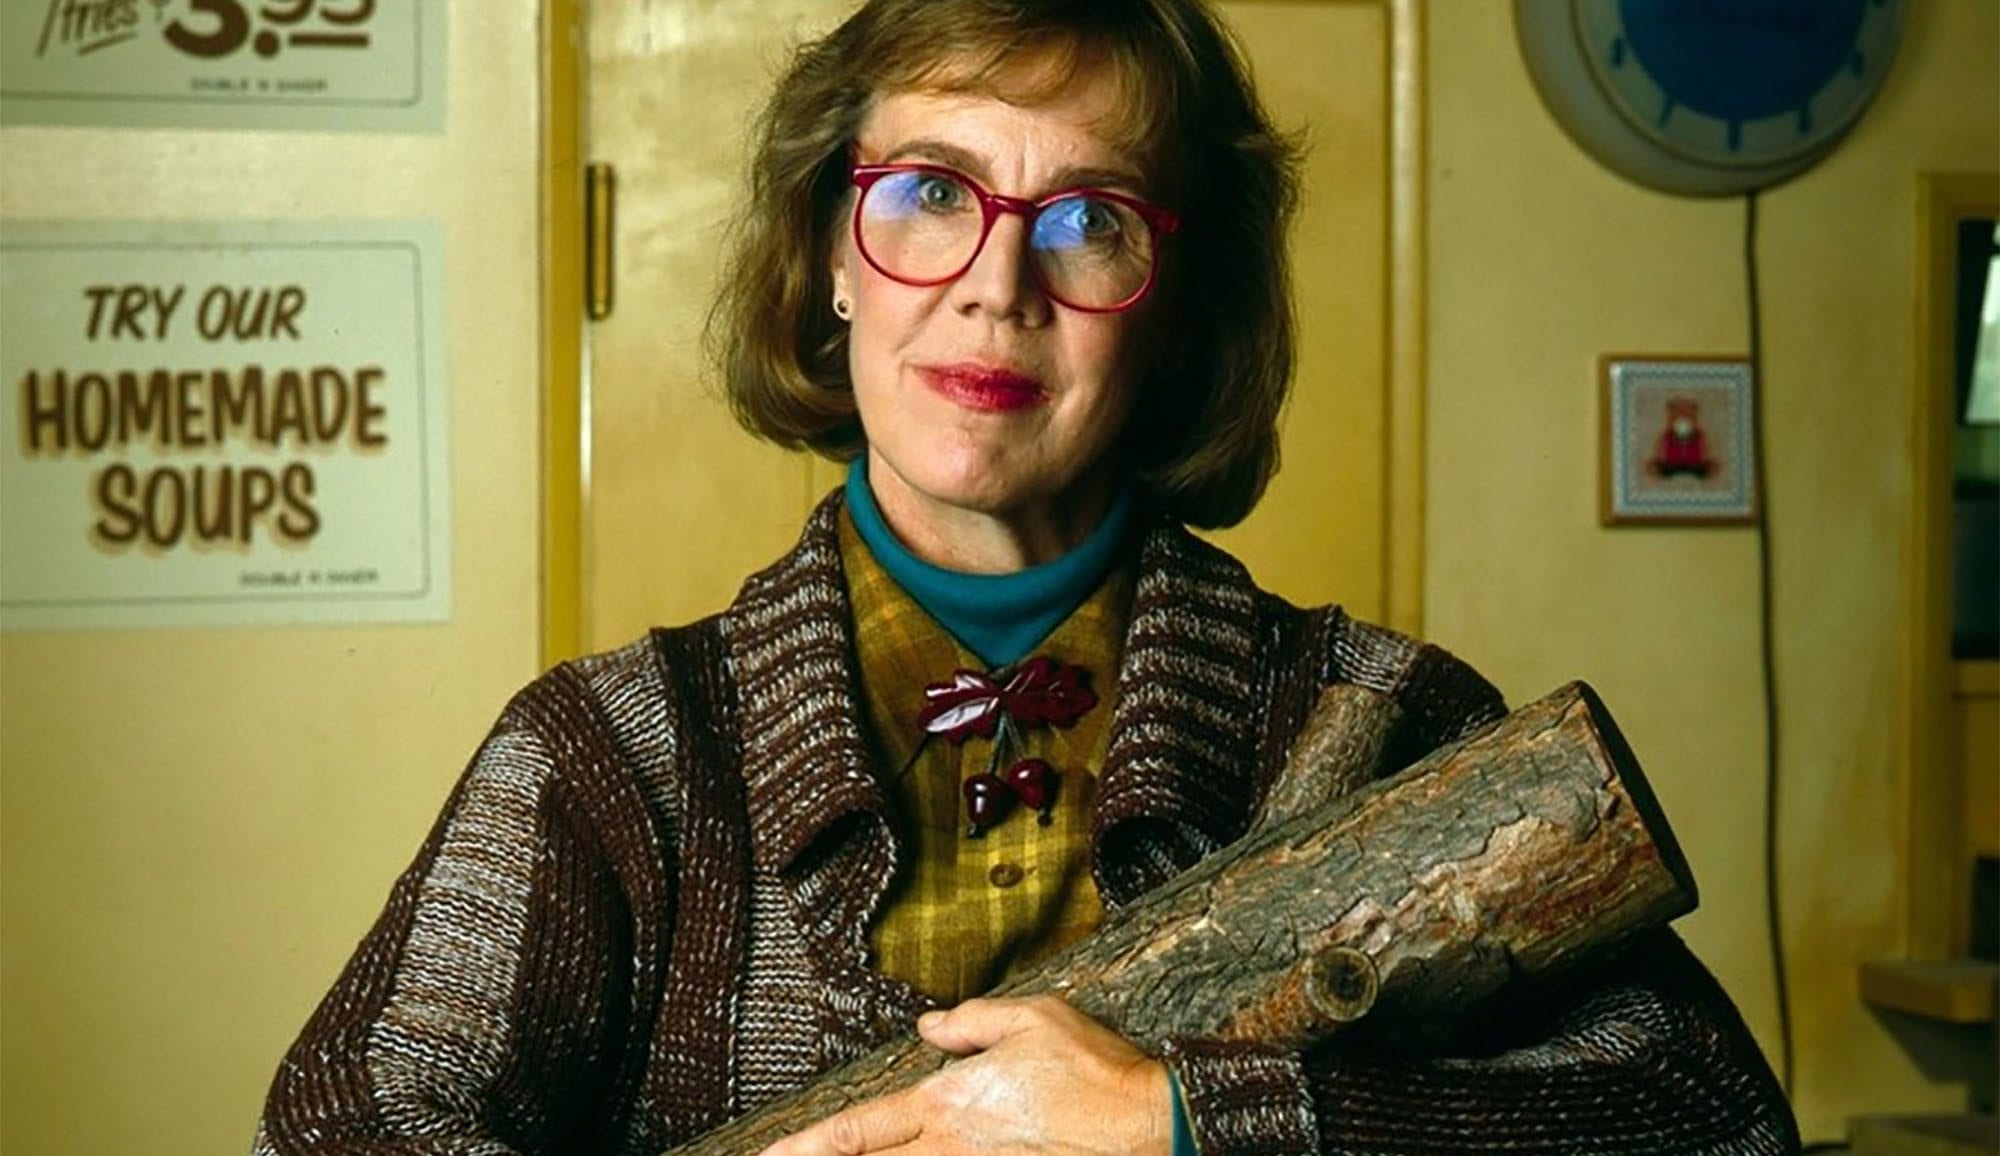 Catherine E. Coulson plays iconic 'Twin Peaks' character the Log Lady. Here’s a ranking of eleven of the Log Lady’s most essential words of wisdom.